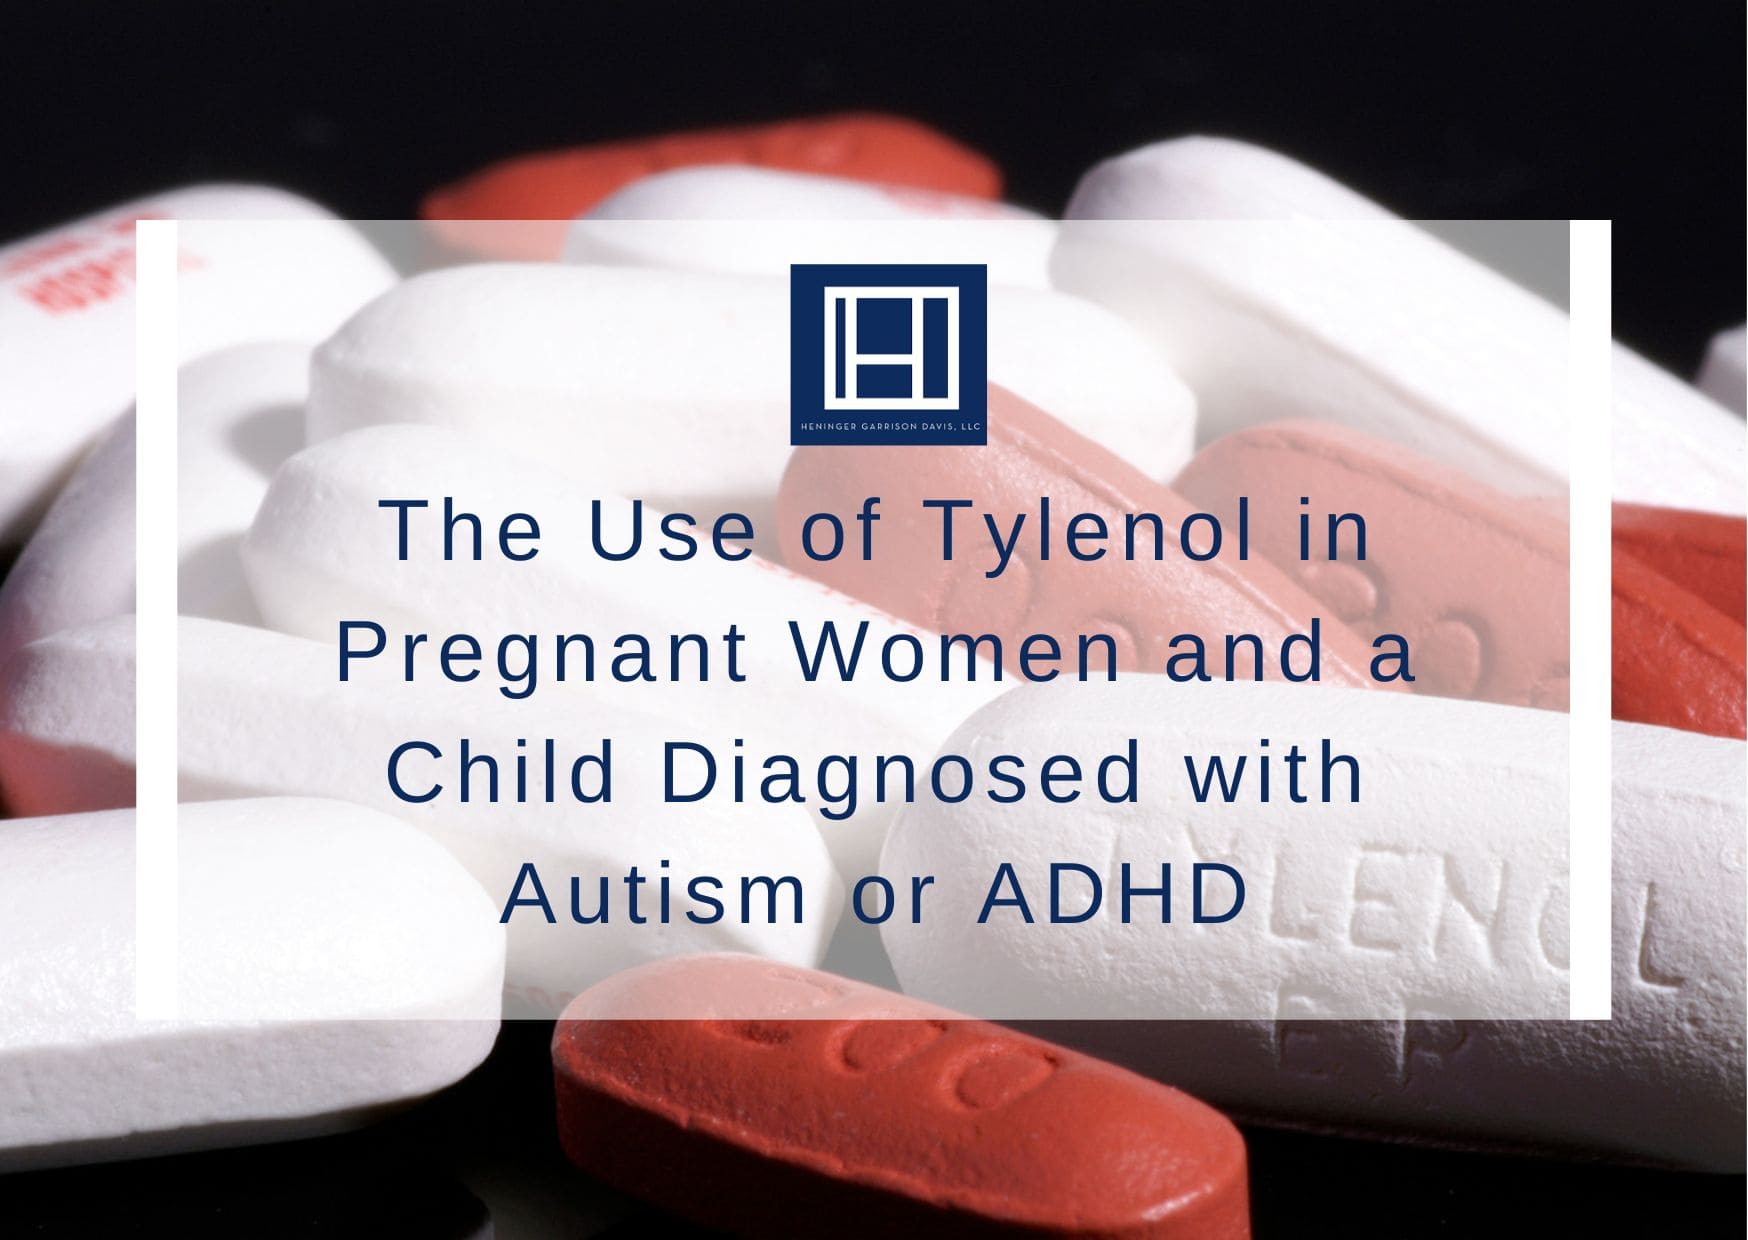 The Use of Tylenol in Pregnant Women and a Child Diagnosed with Autism or ADHD